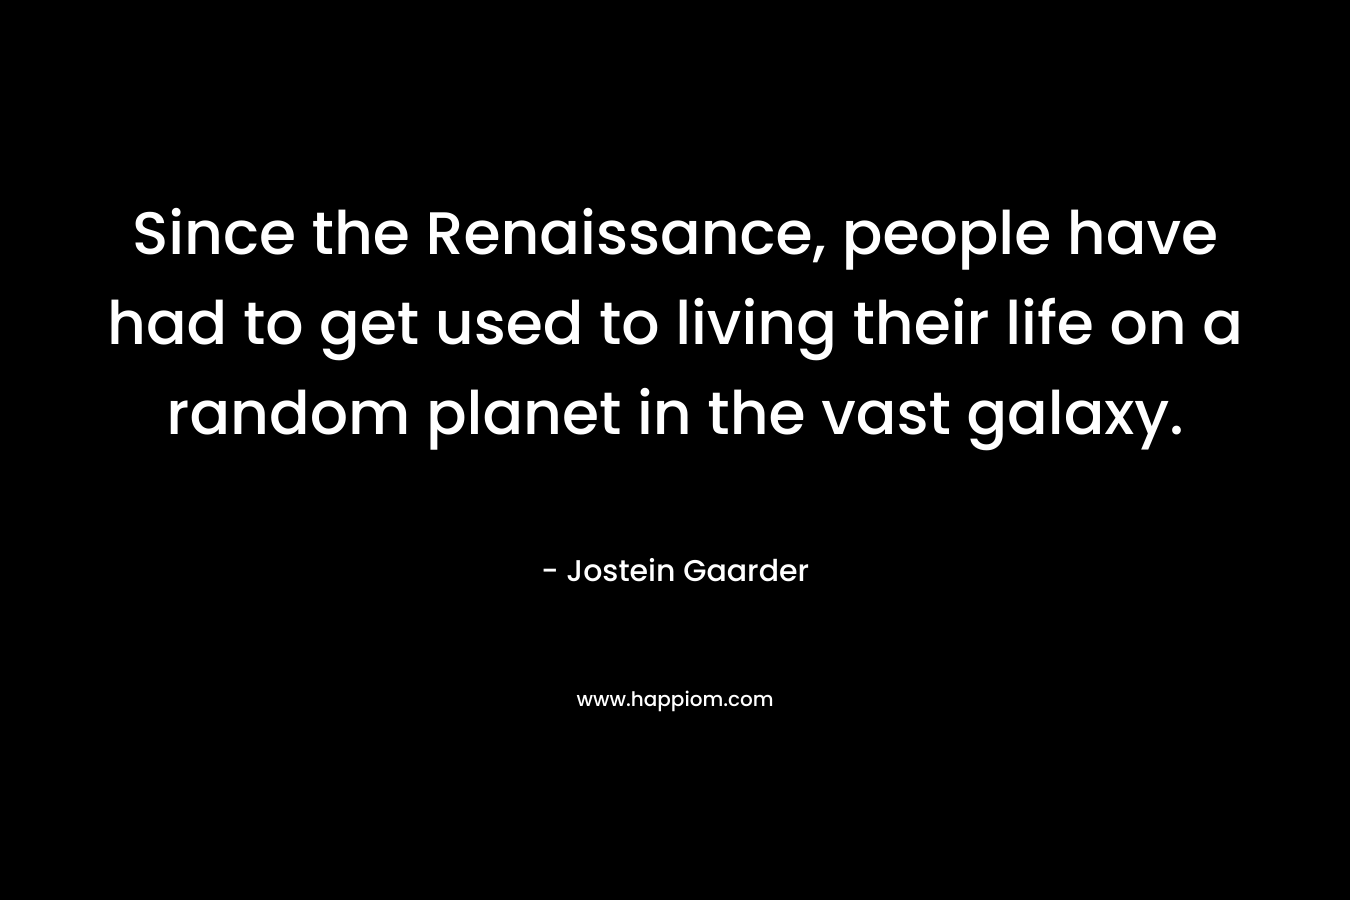 Since the Renaissance, people have had to get used to living their life on a random planet in the vast galaxy.